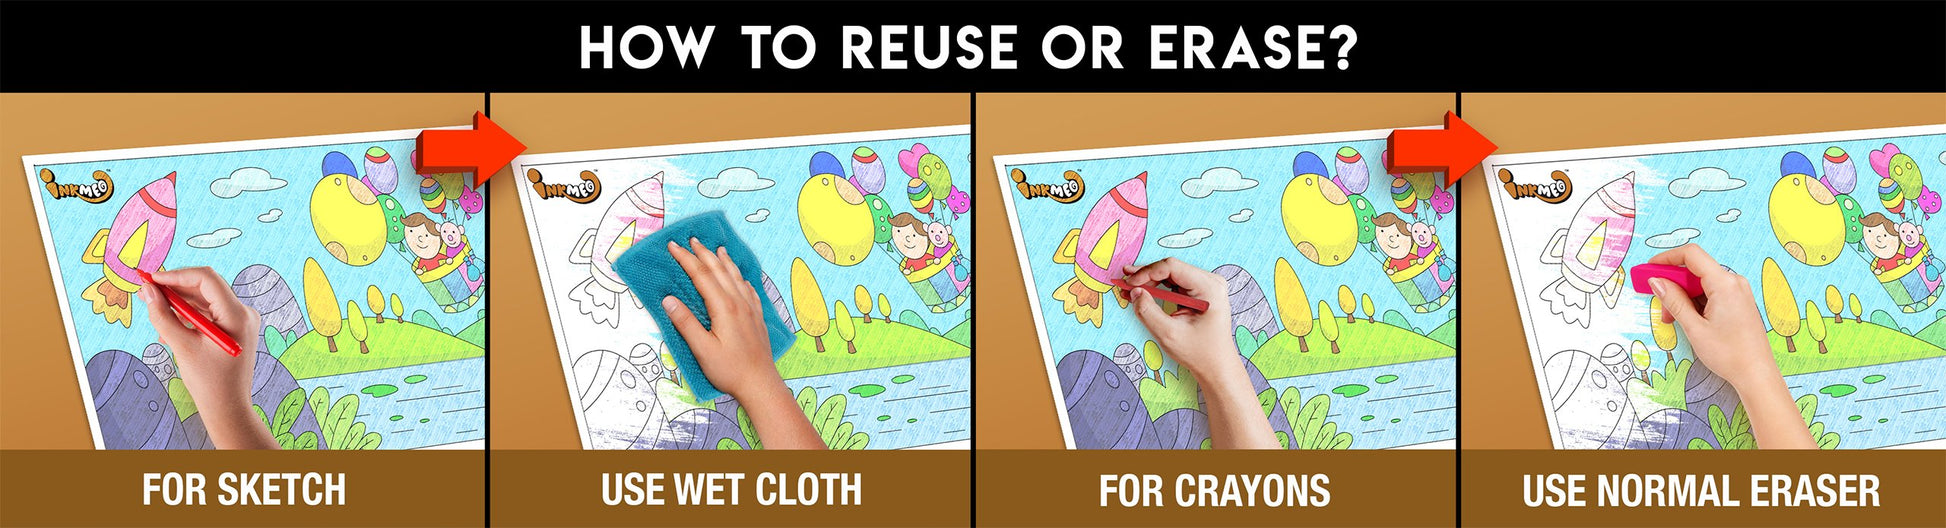 The image has a brown background with four pictures demonstrating how to reuse or erase: the first picture depicts sketching on the transport sheet, the second shows using a wet cloth to remove sketches, the third image displays crayons colouring on the transport sheet, and the fourth image illustrates erasing crayons with a regular eraser.